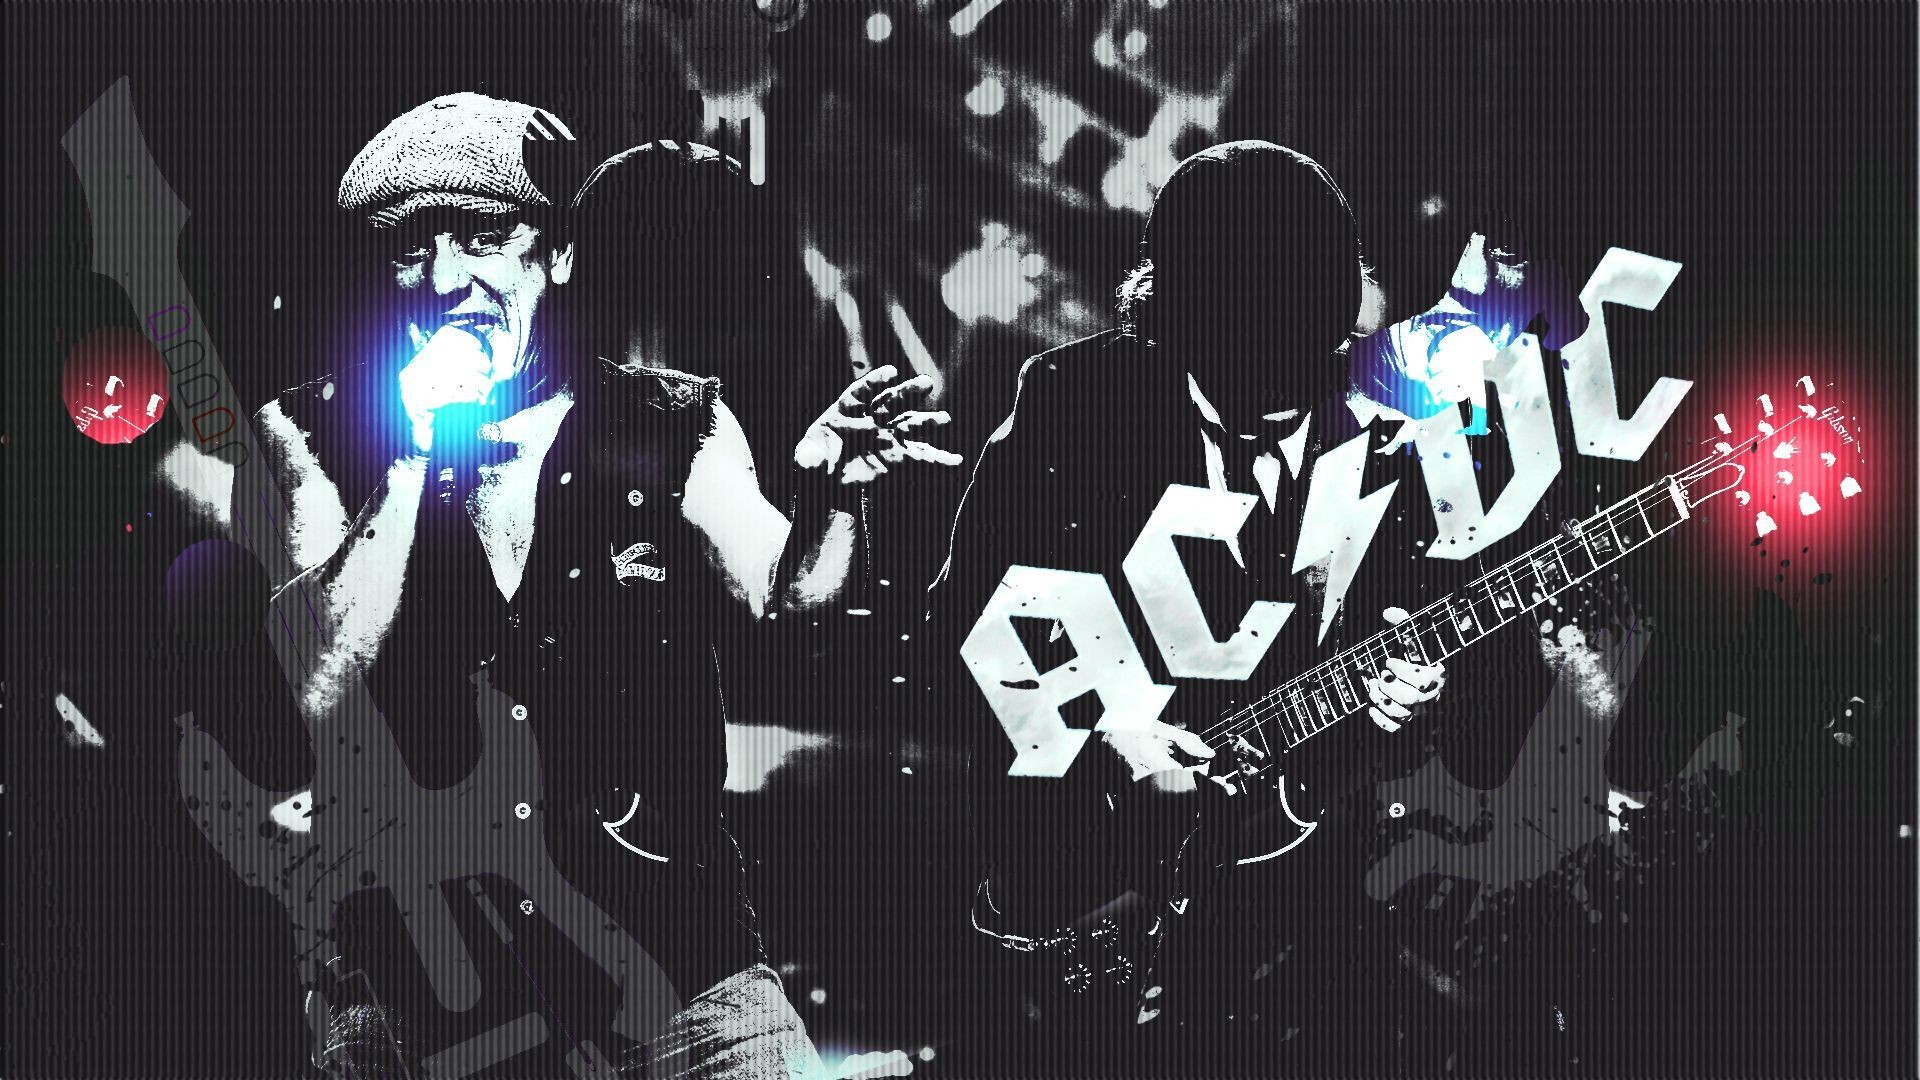 1920x1080 Adorable gallery of ac/dc cover, this gallery contains high-quality and  high-resolution cover, just click on the wallpaper you choose, download it  and set ...